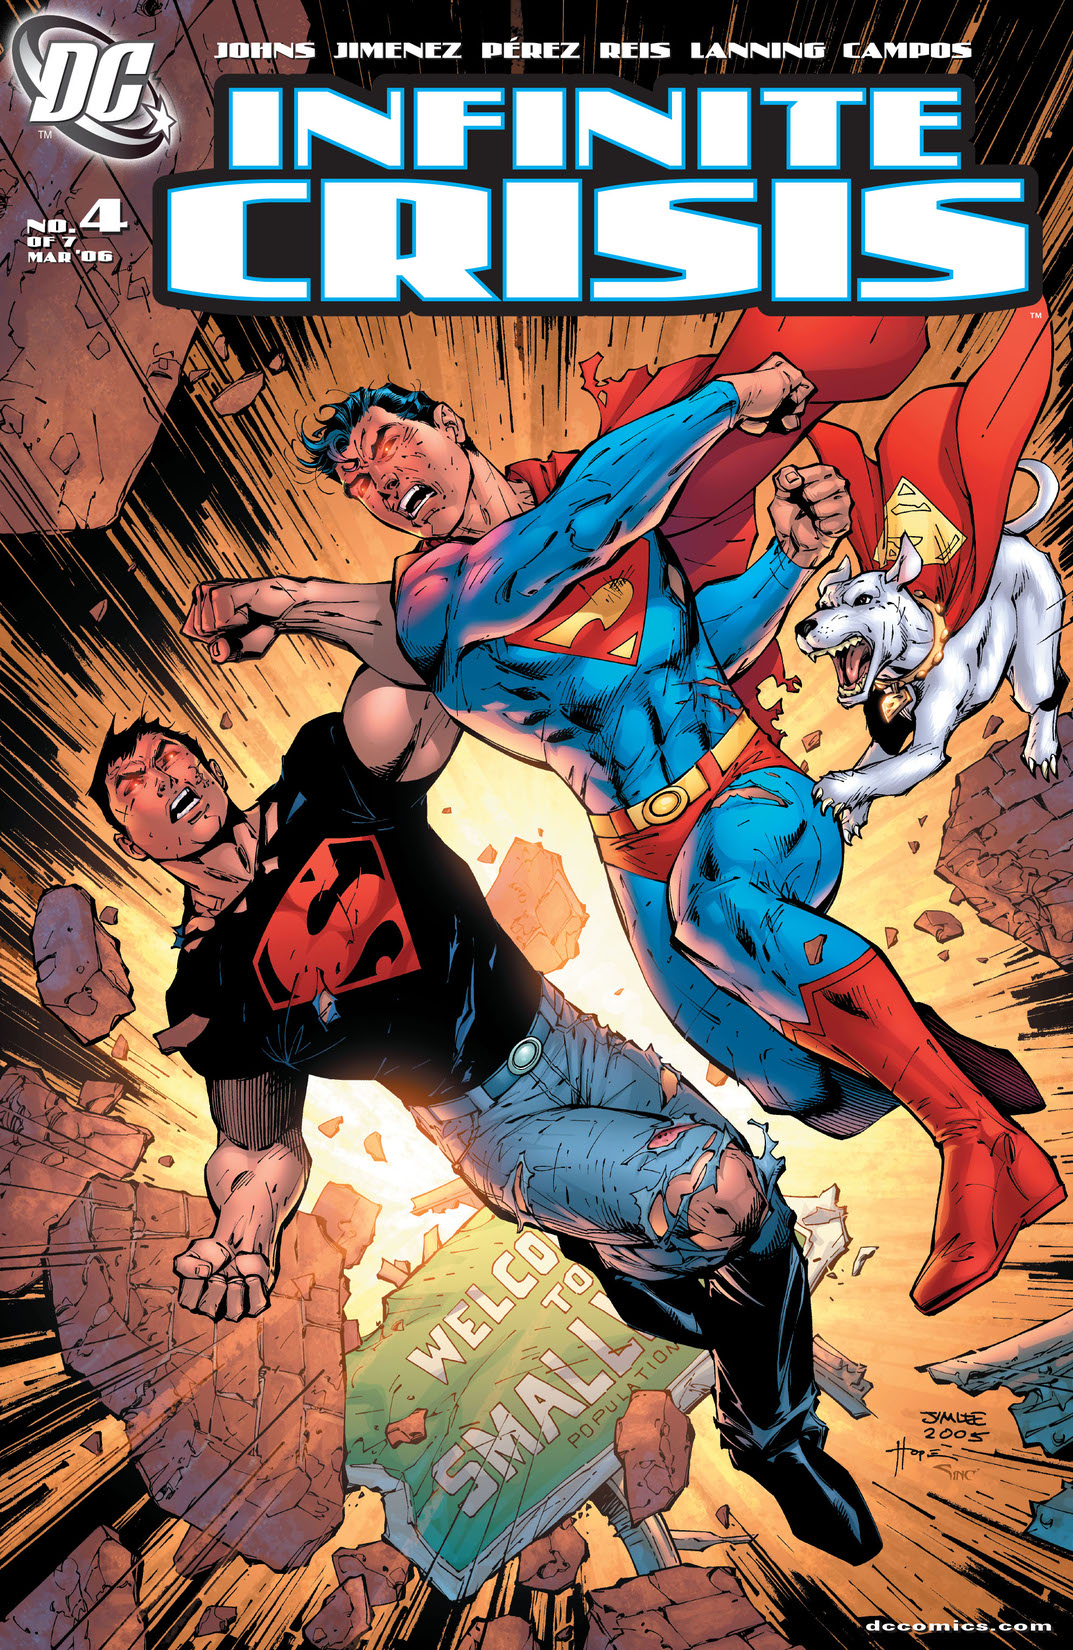 Infinite Crisis #4 preview images